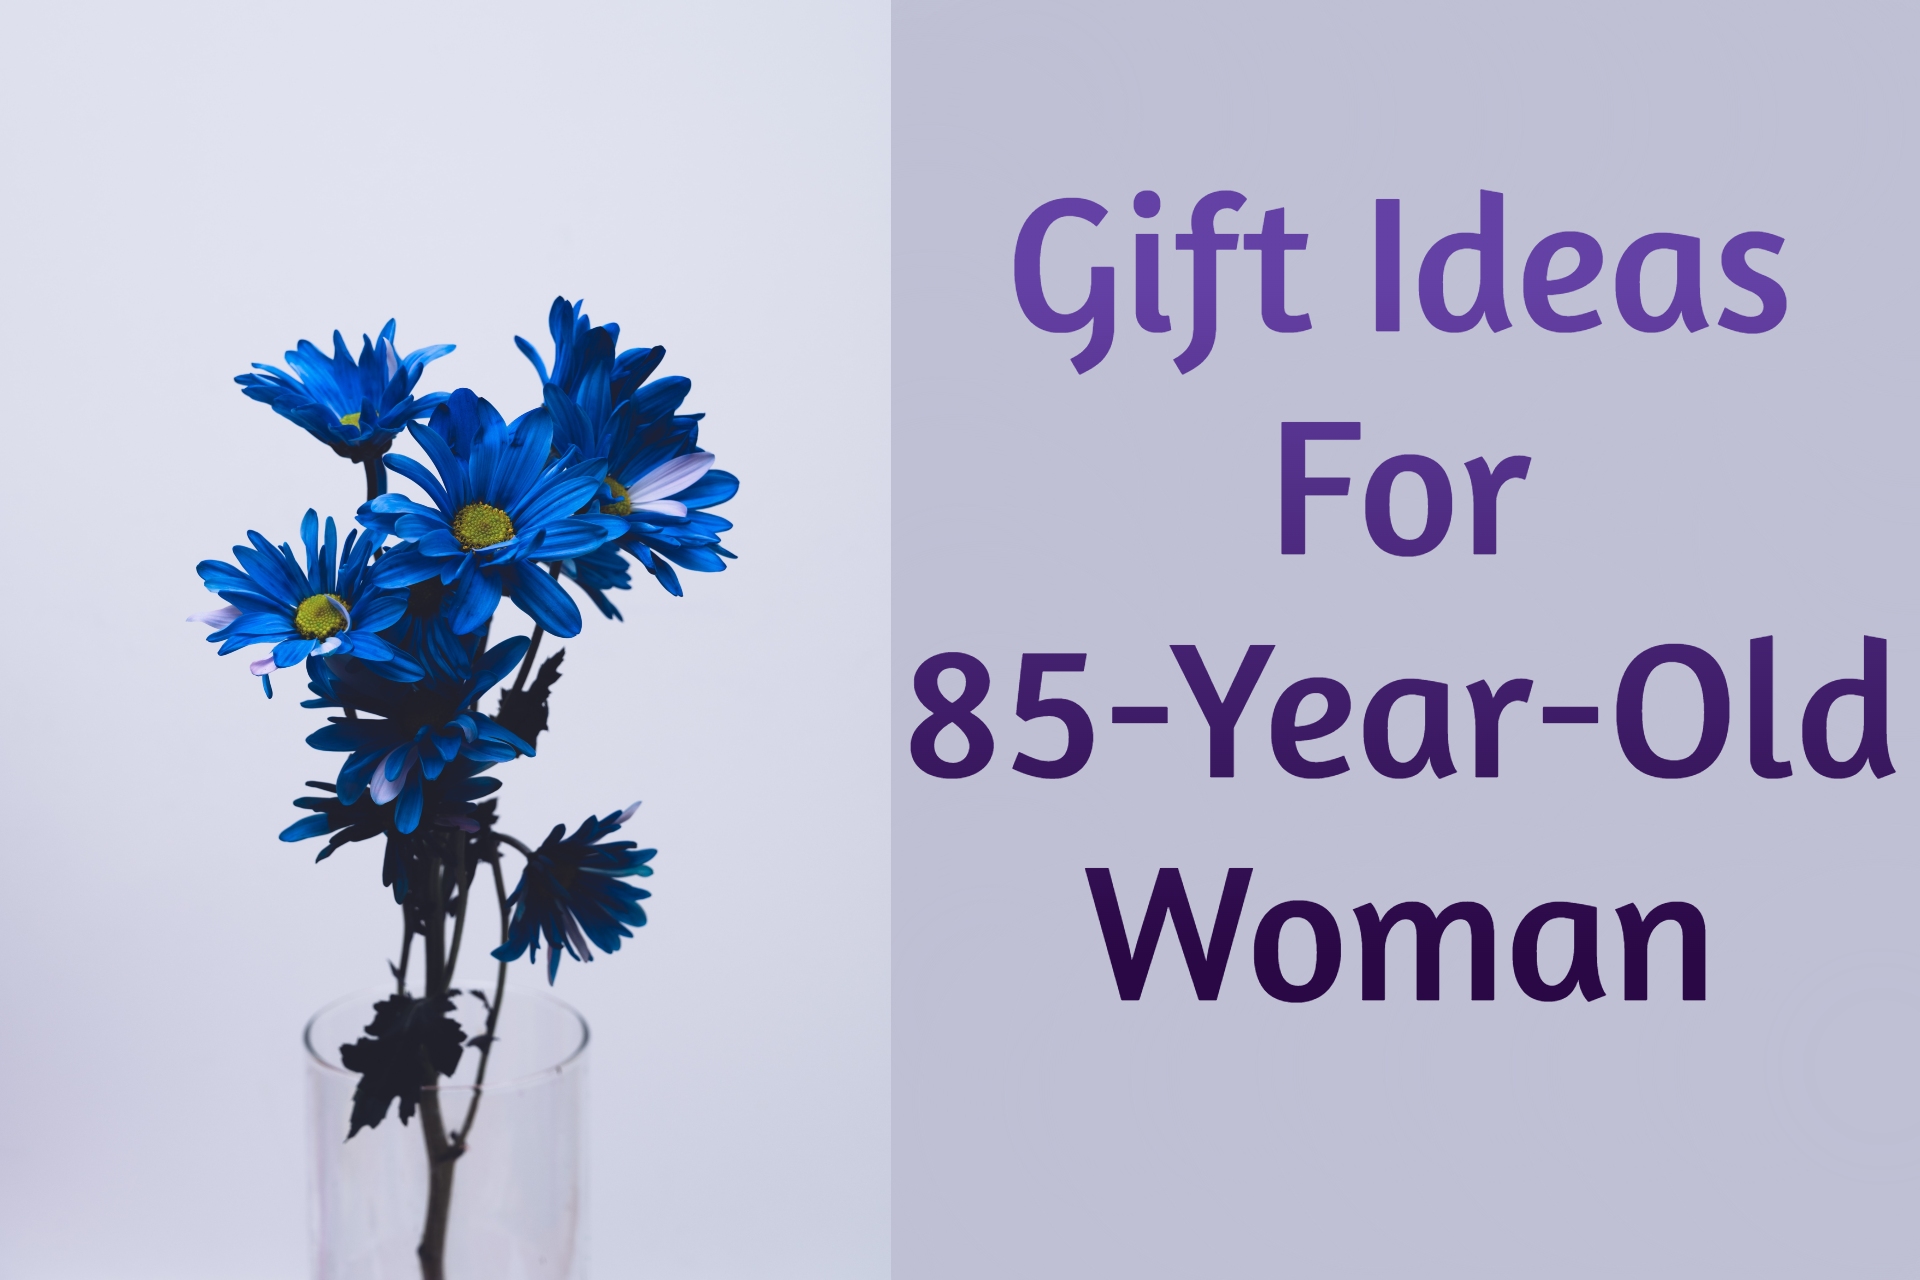 Cover image of gift ideas for 85-year-old woman by Giftsedge